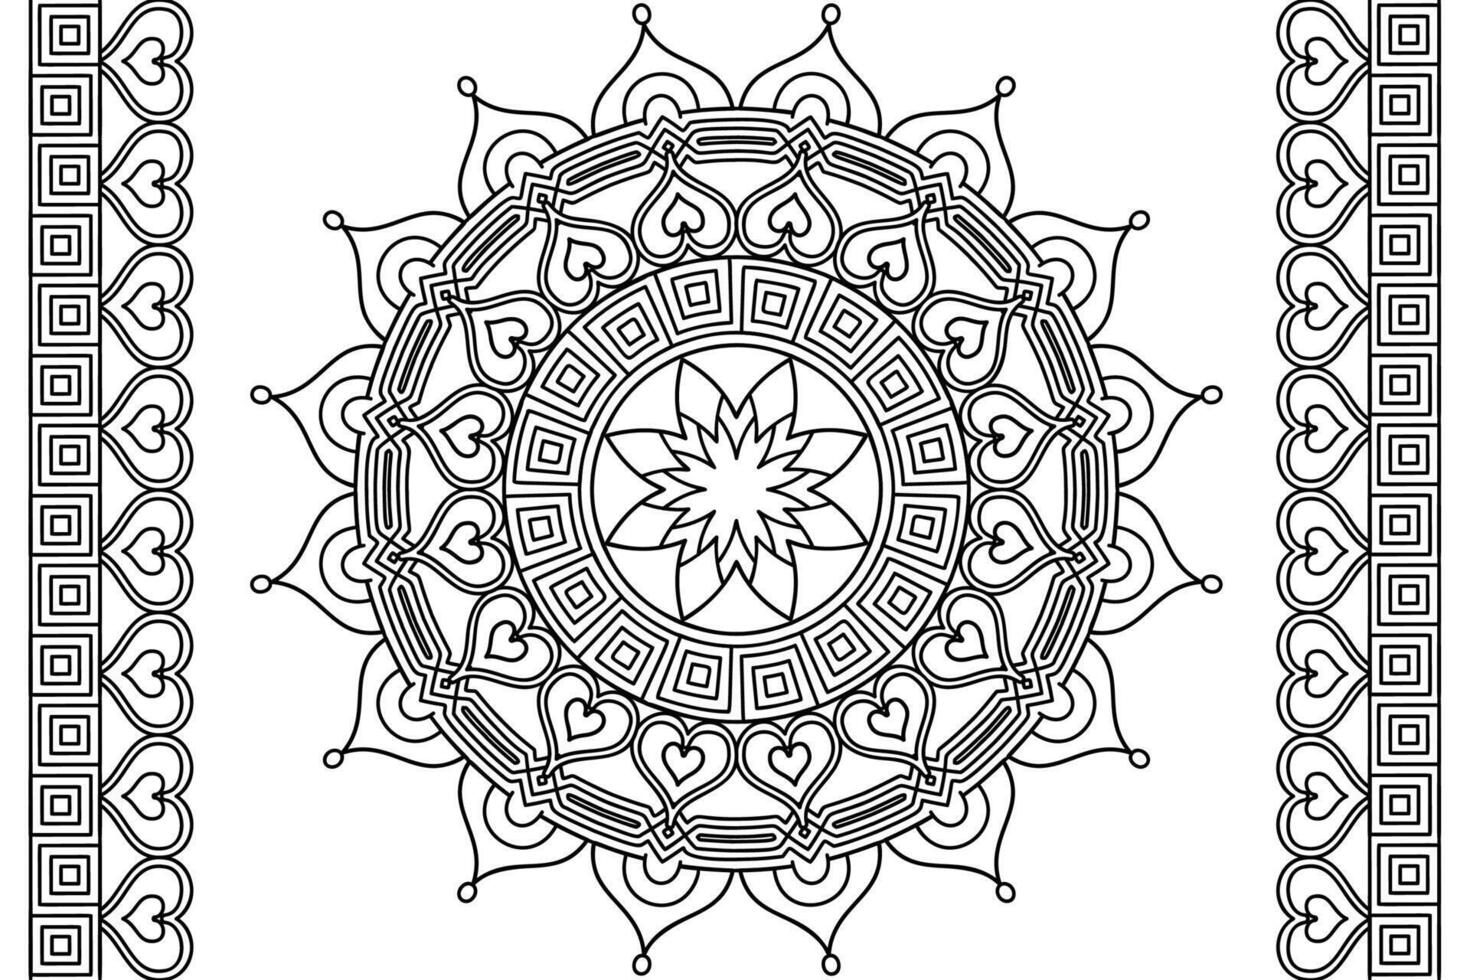 Mandala Coloring page for kids and adults Page for relaxation and meditation. Circular pattern. Decorative ornament ethnic oriental style. line art drawing coloring page. illustration vector